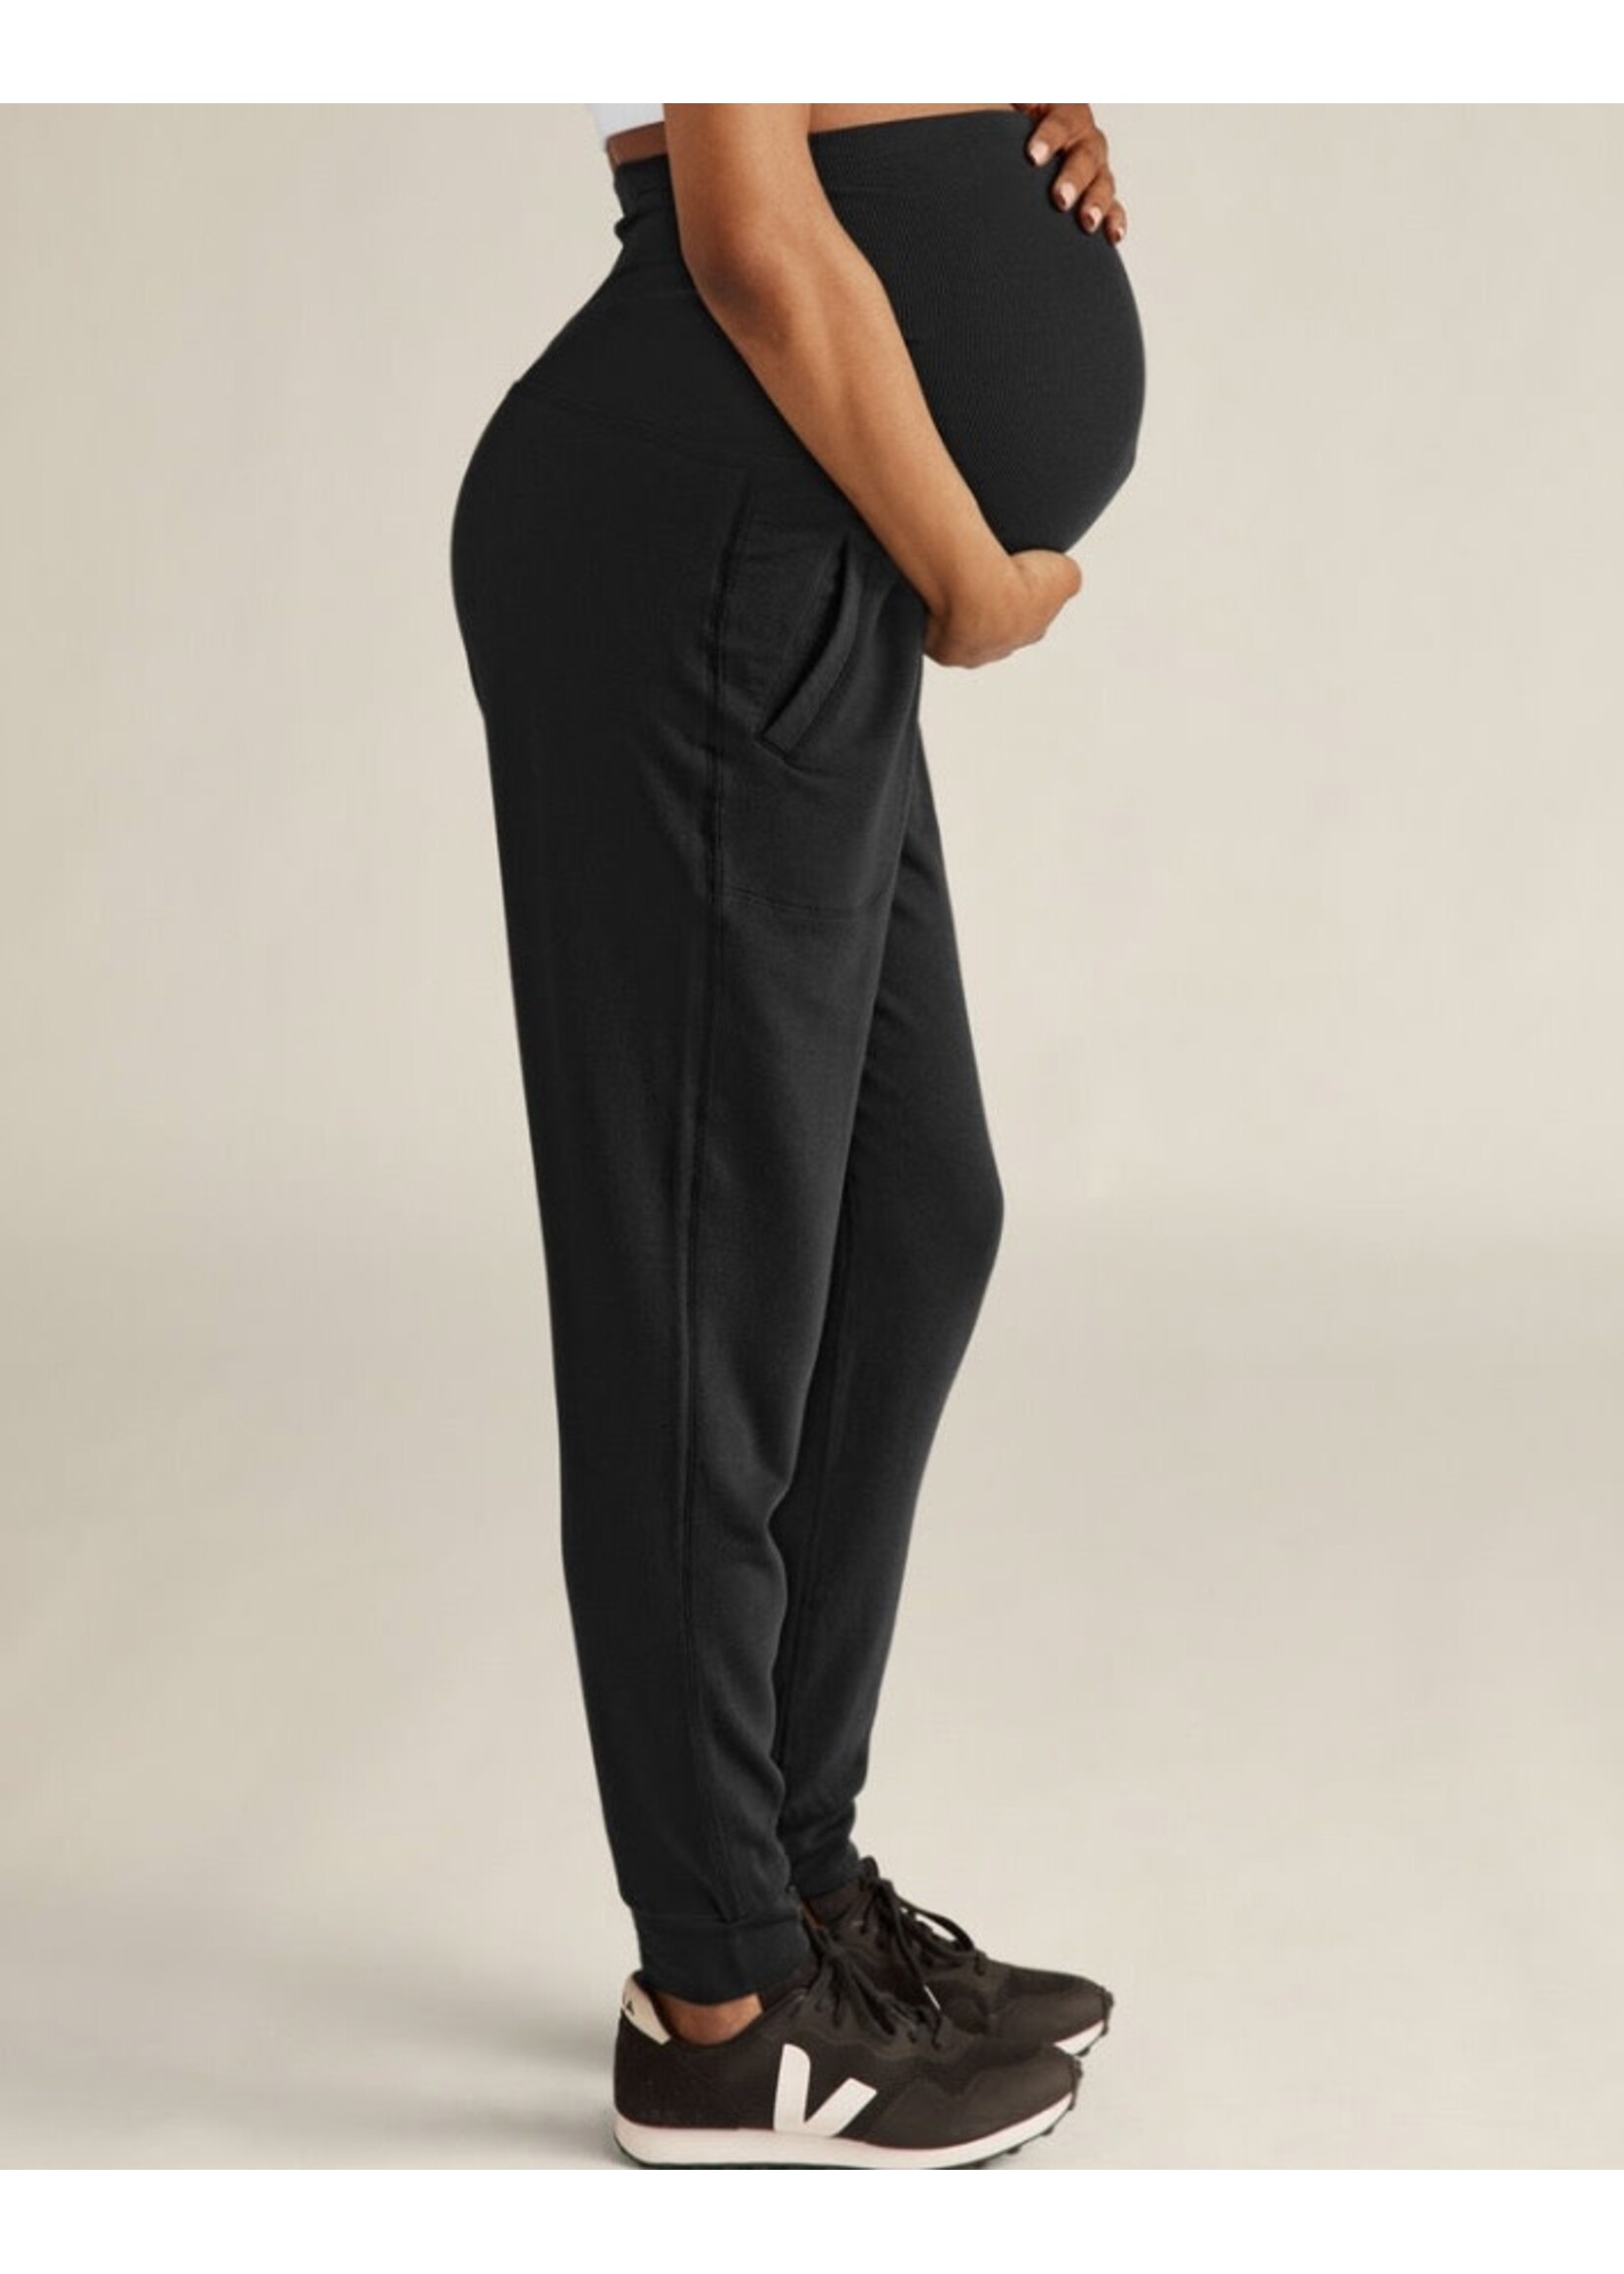 Favorite Nordstrom Maternity Products • BrightonTheDay